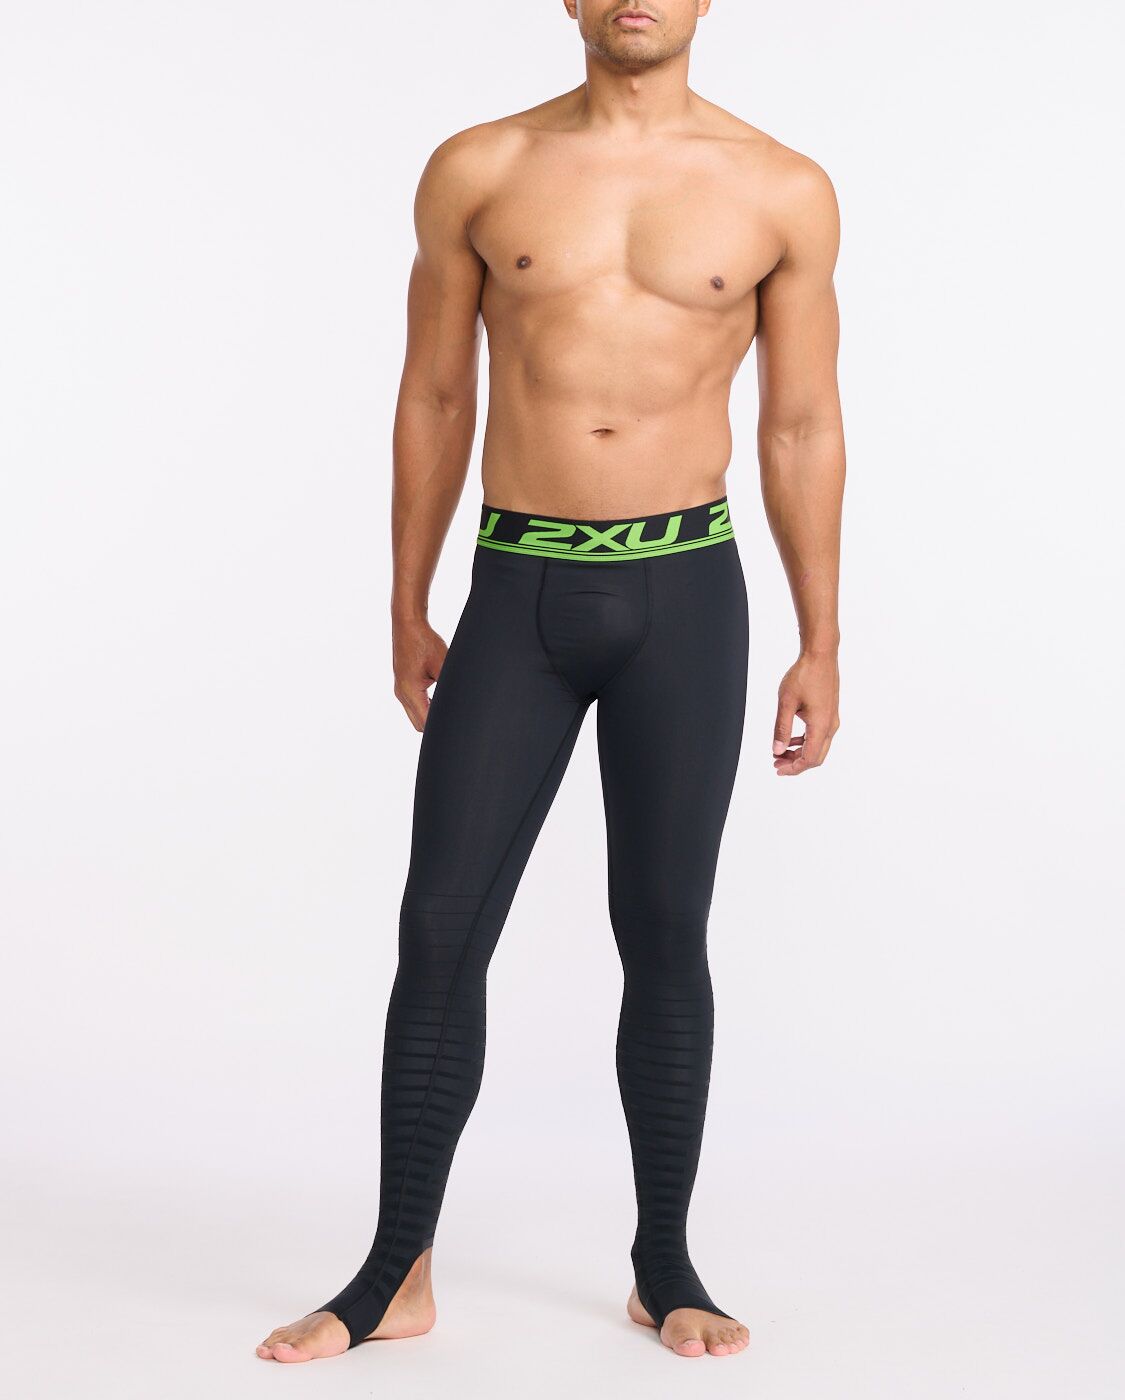 2XU Men's Elite Power Recovery Compression Tights, Black/Nero, X-Large/Tall